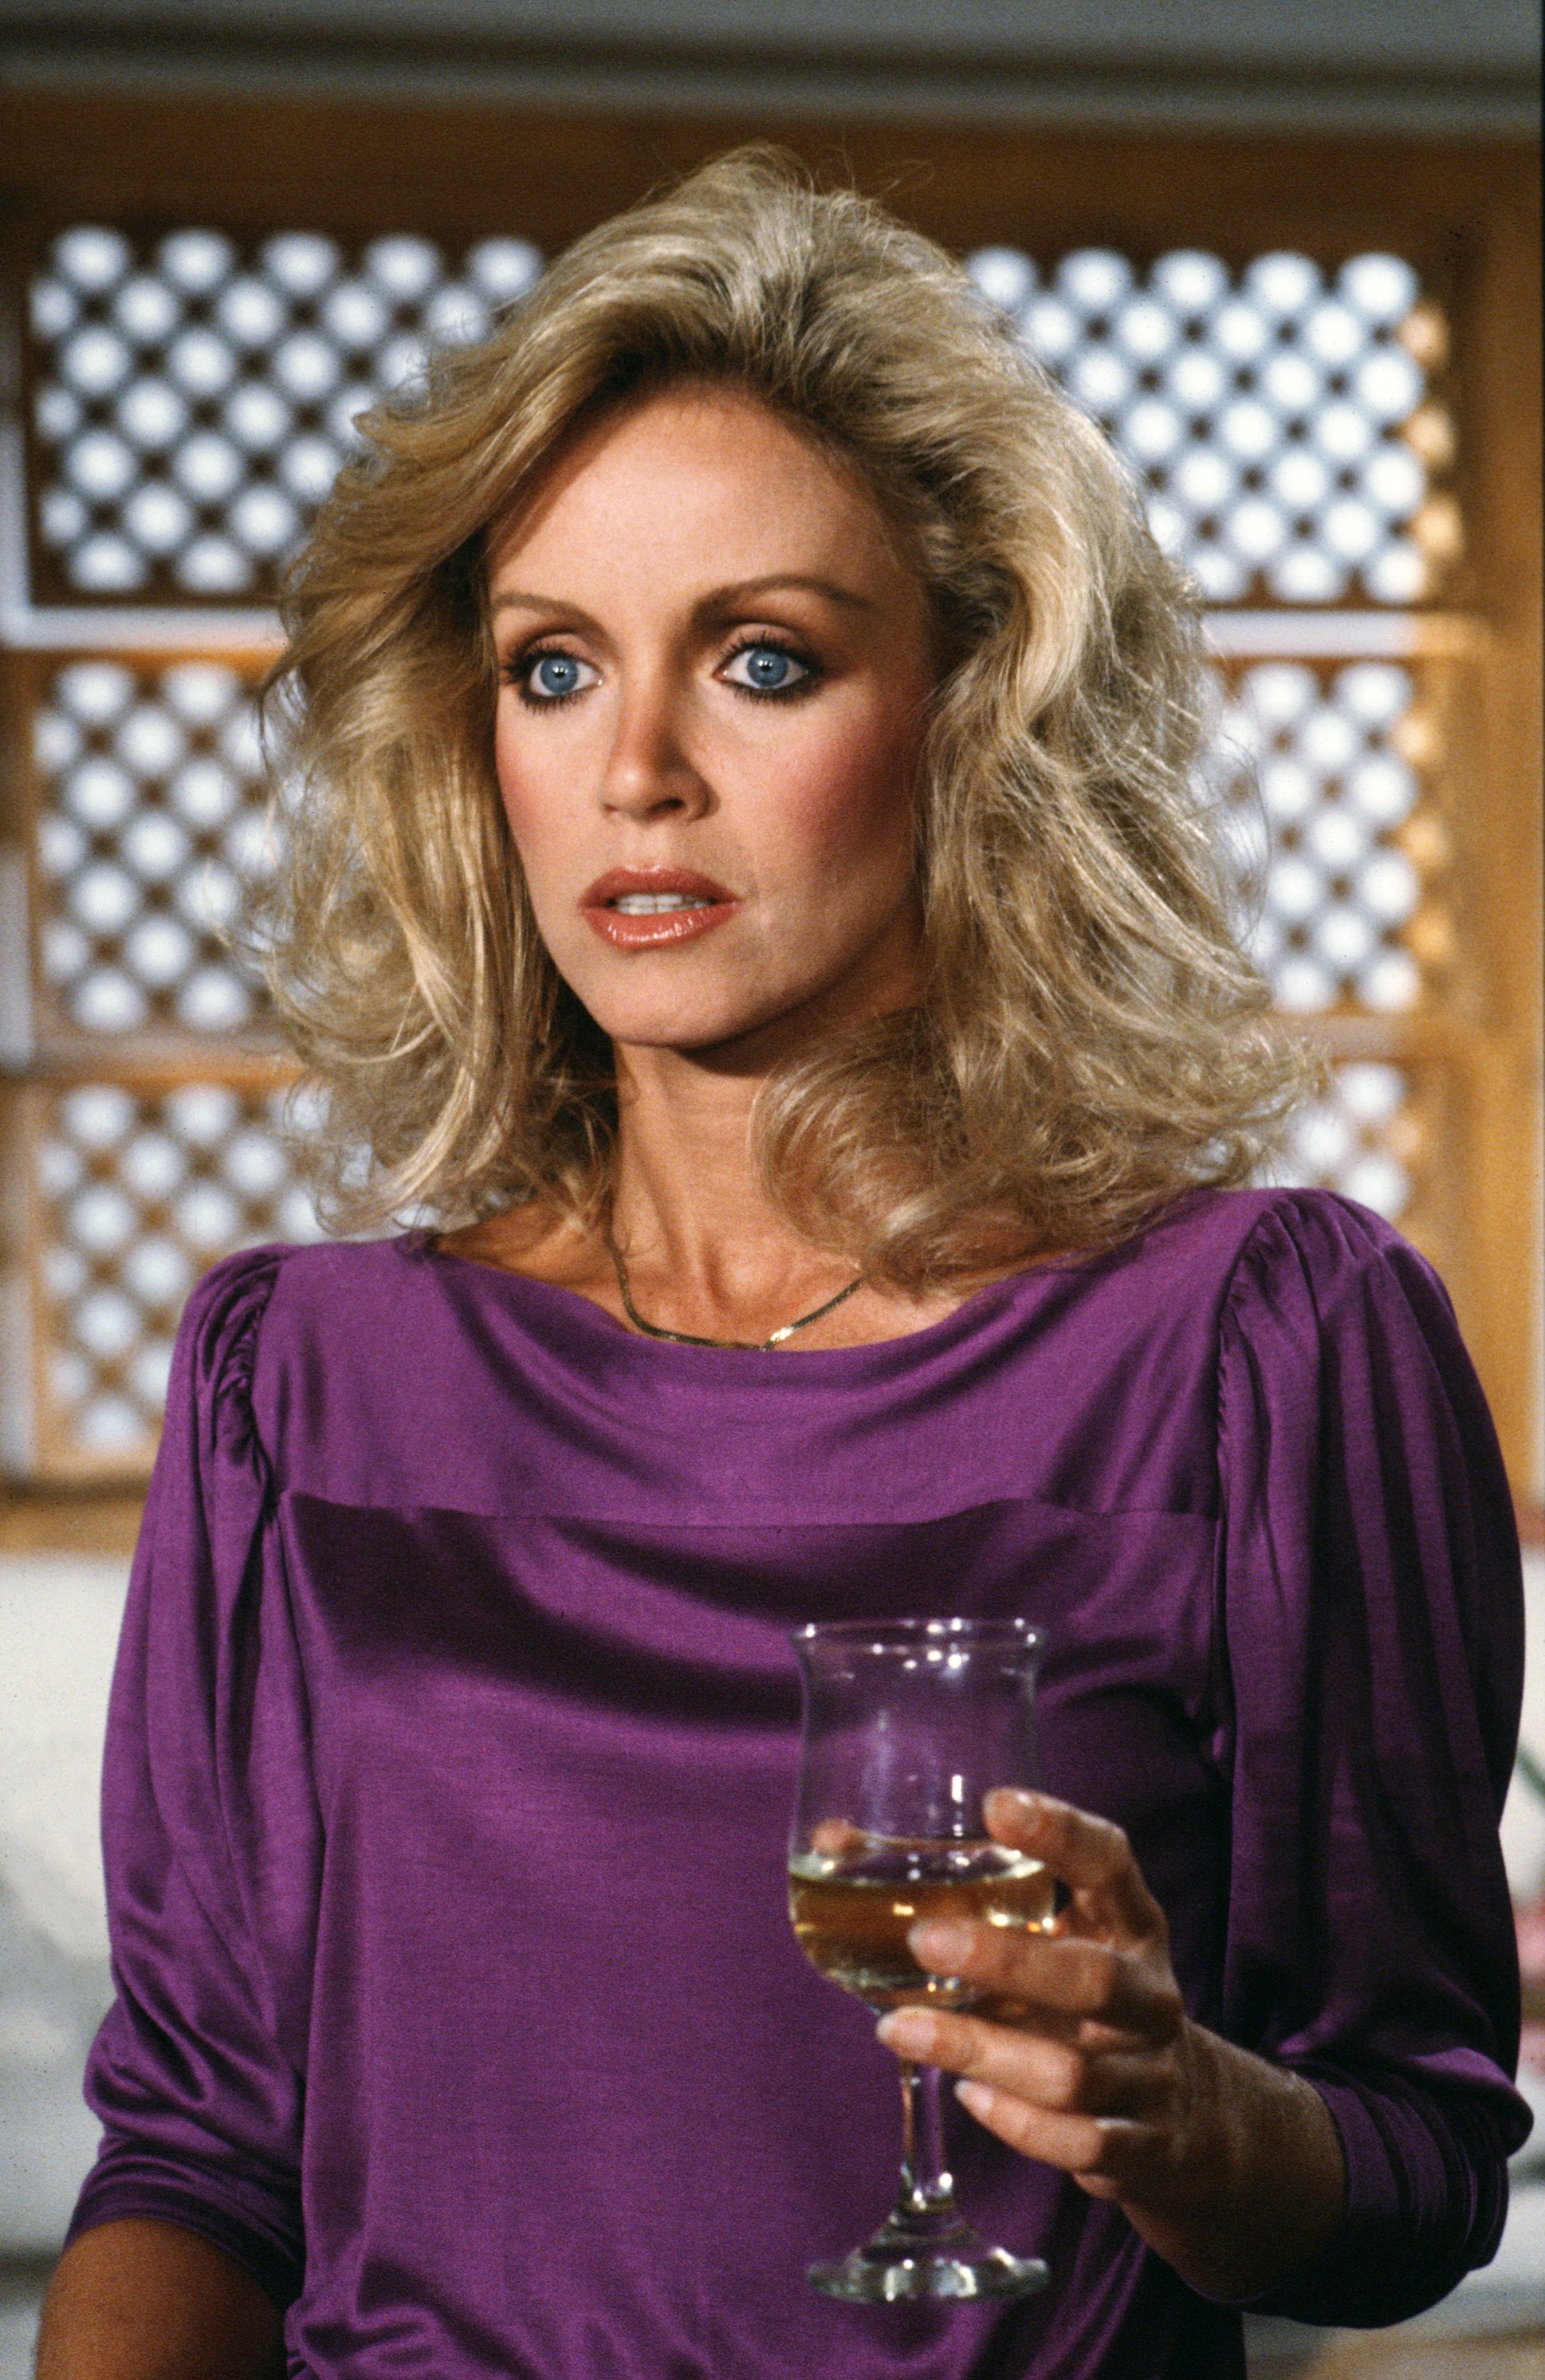 Donna Mills in "Knots Landing" in August 1982 | Source: Getty Images